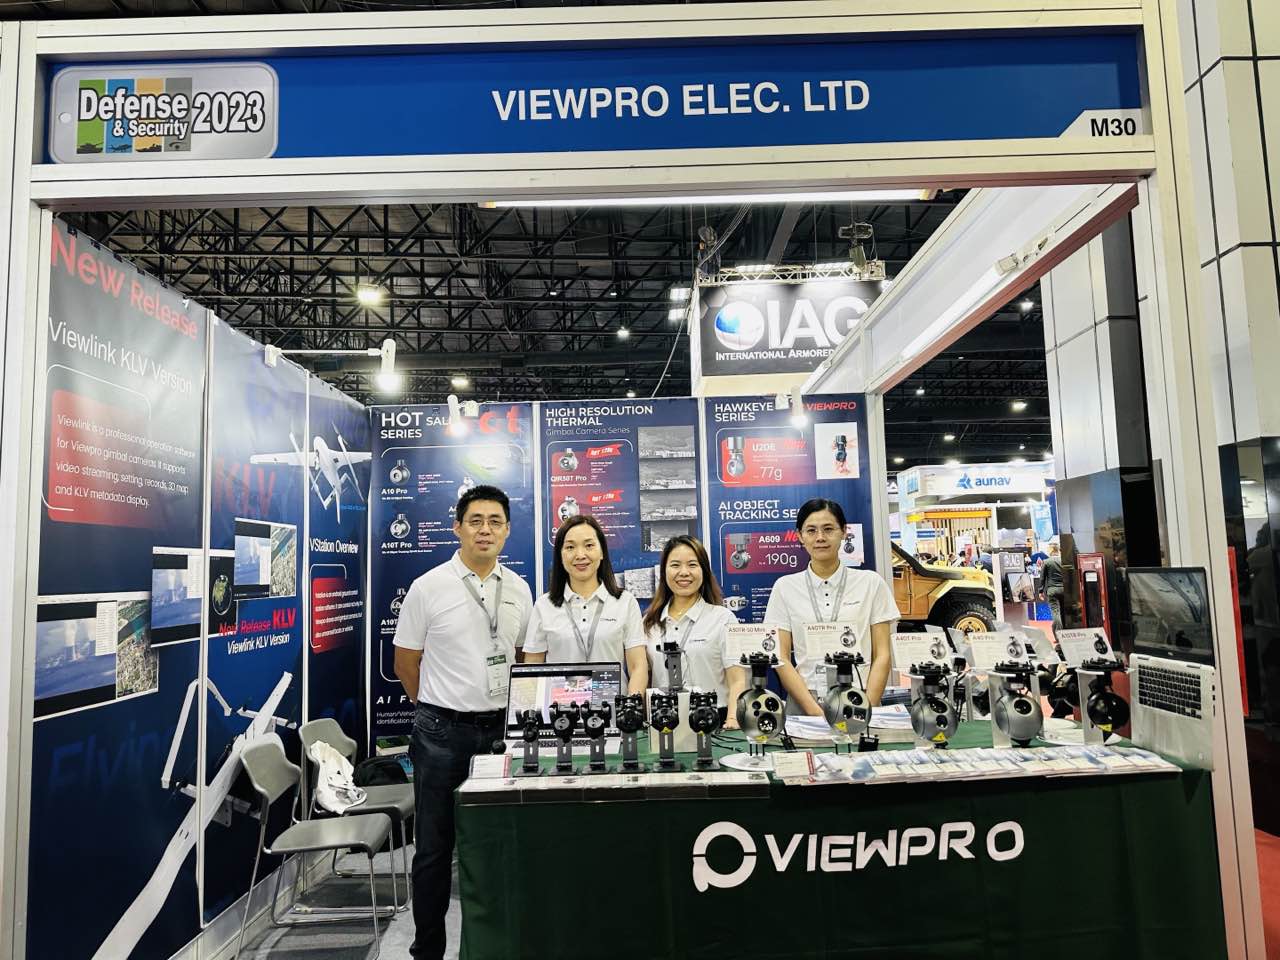 Viewpro's Groundbreaking Innovations Steal the Spotlight at Defense & Security 2023 Exhibition!